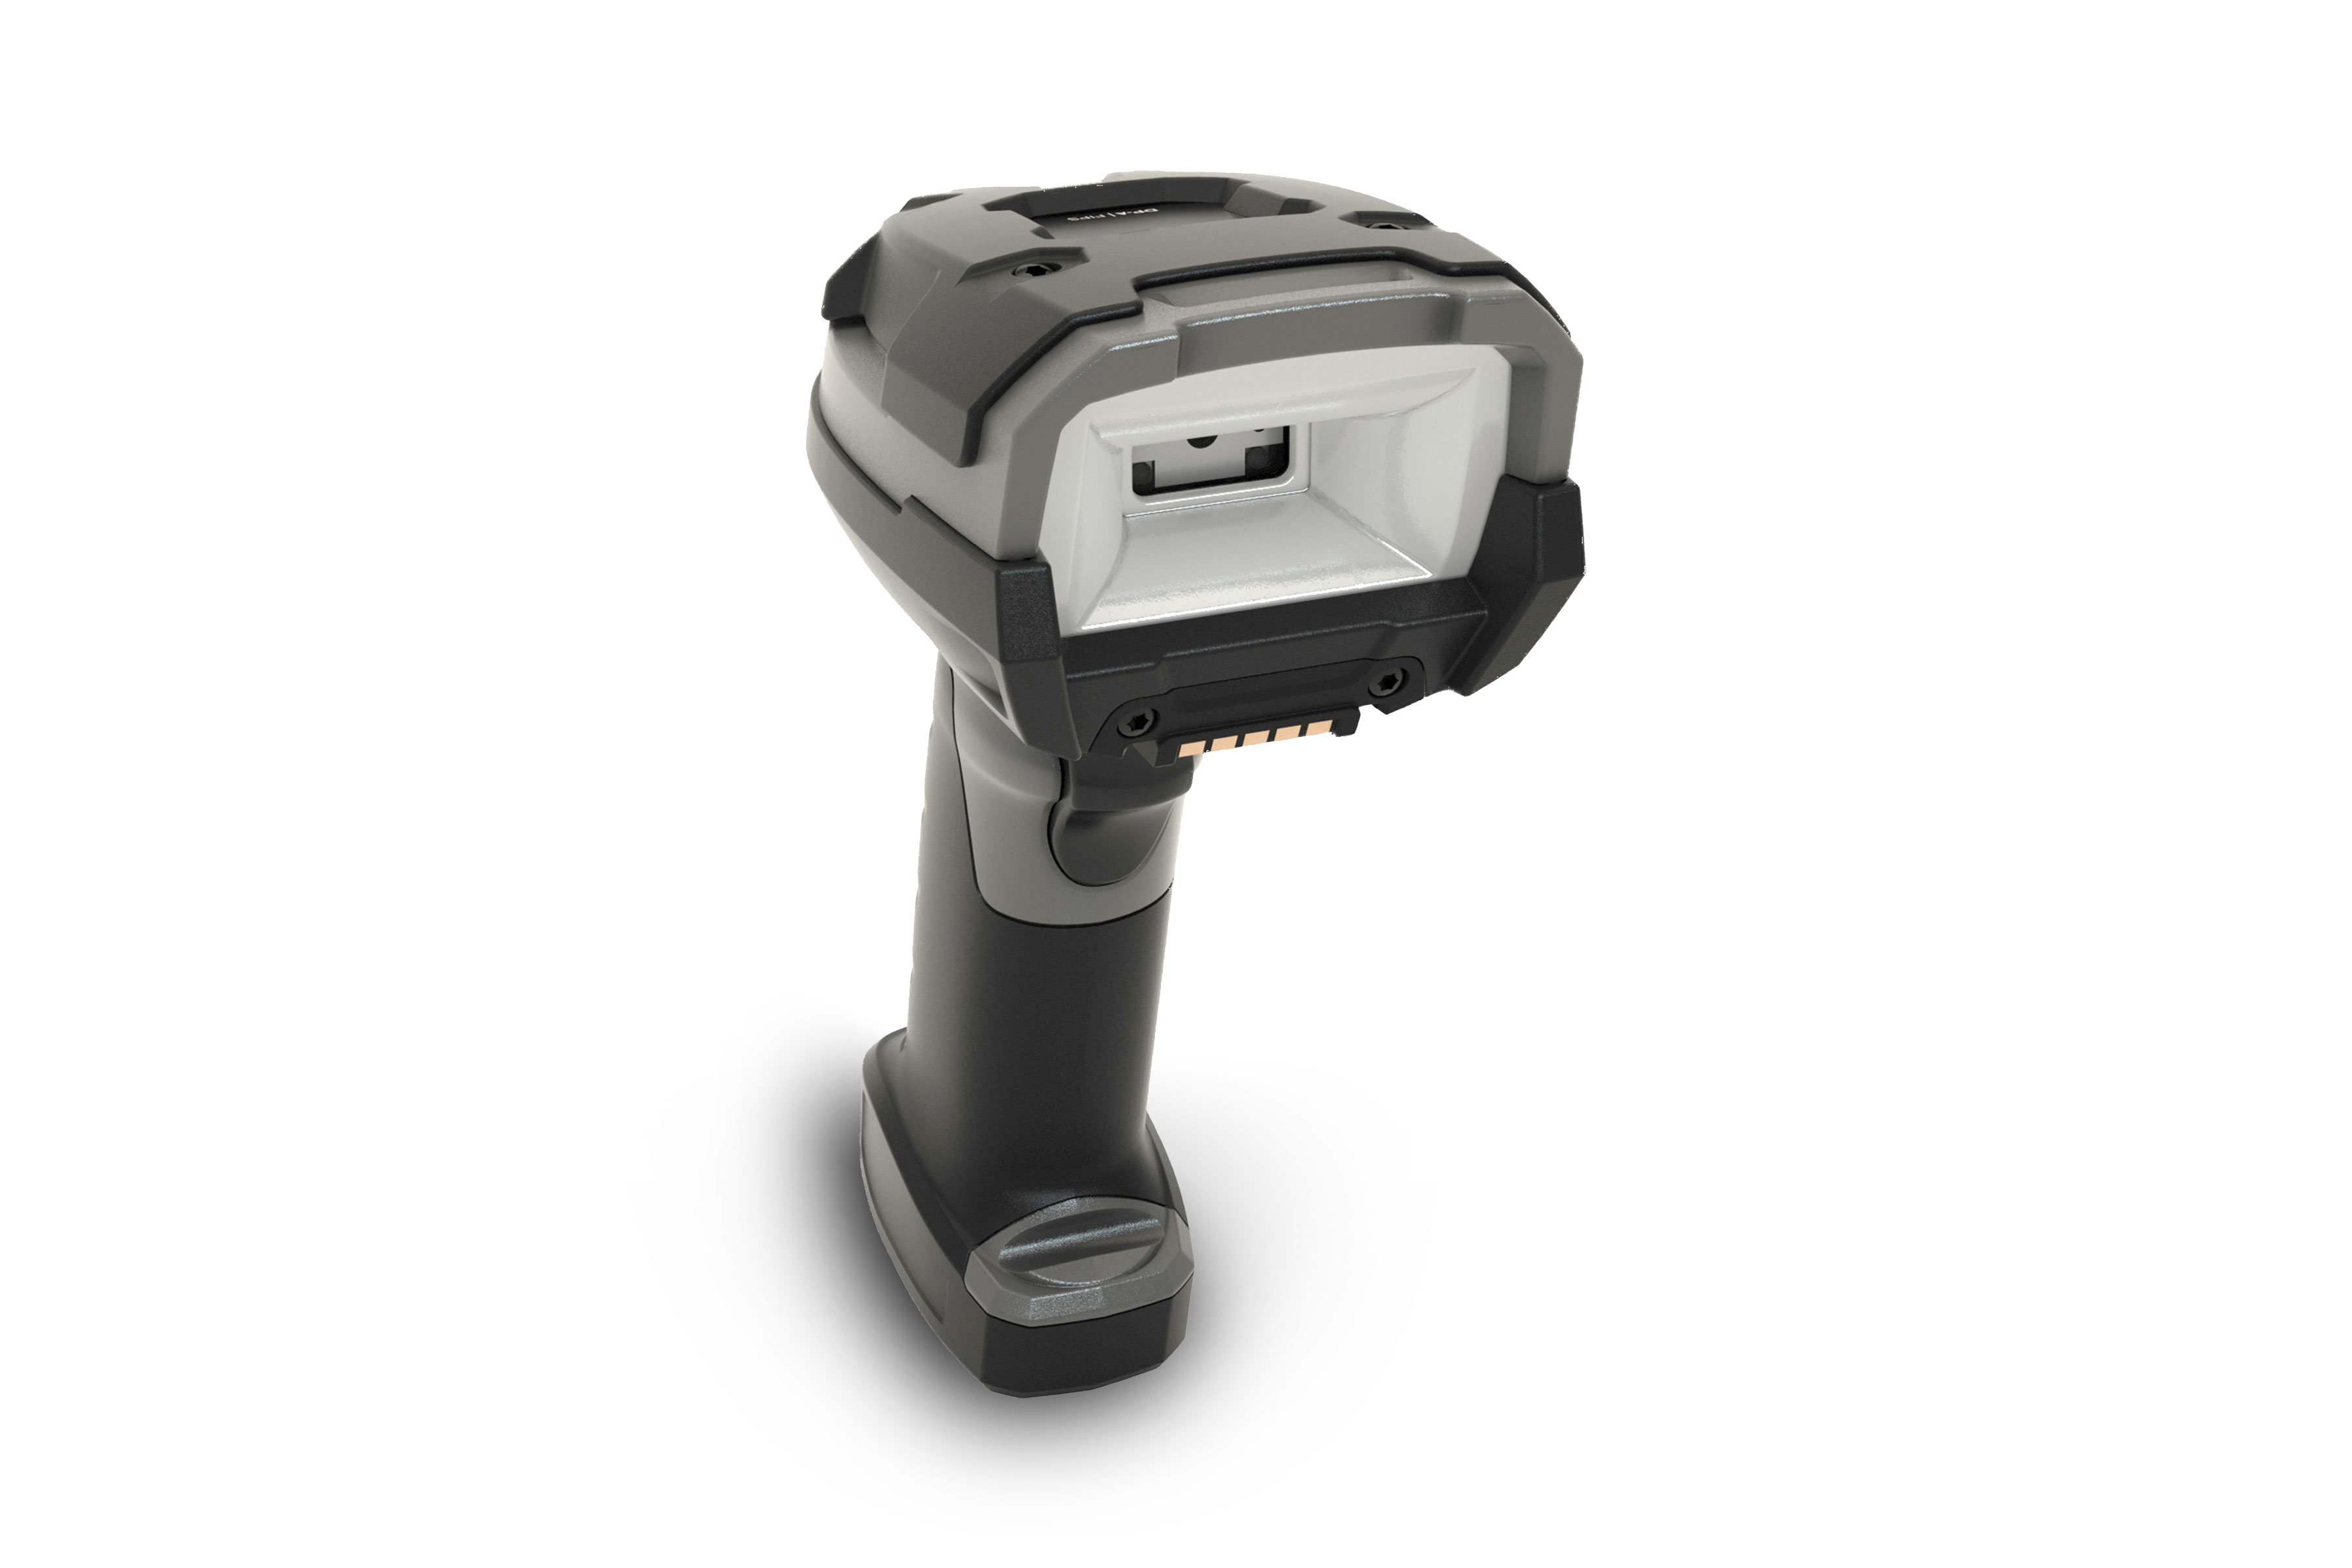 Zebra DS3600-dpa rugged barcode scanner, grey and black hardware